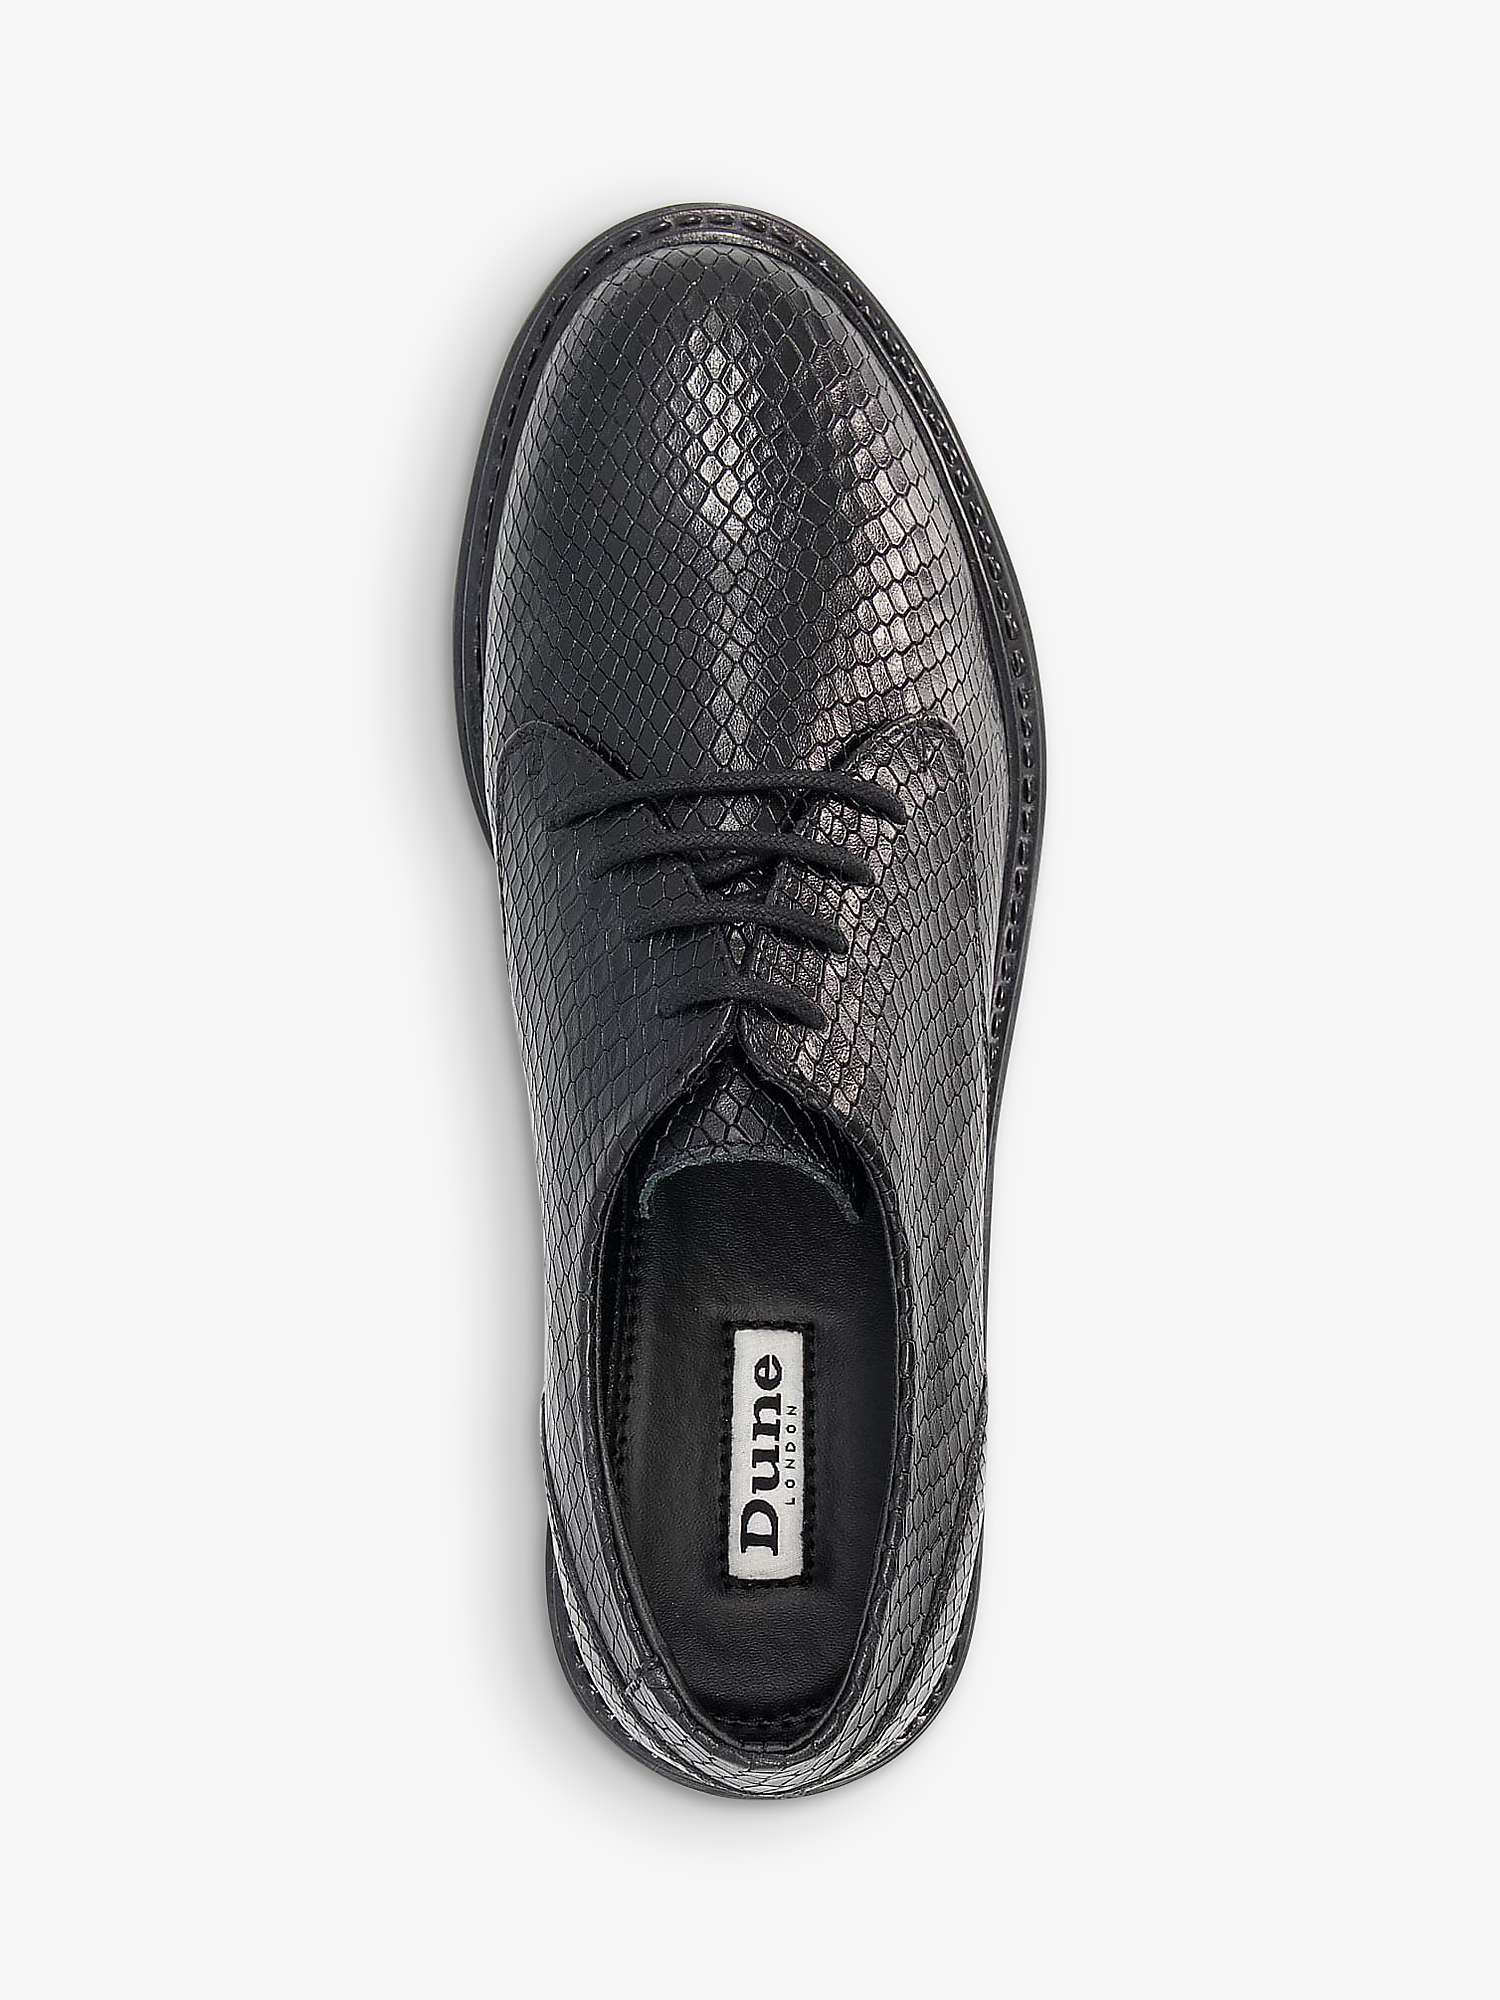 Dune Leather Reptile-Effect Leather Lace-Up Shoes, Black at John Lewis ...